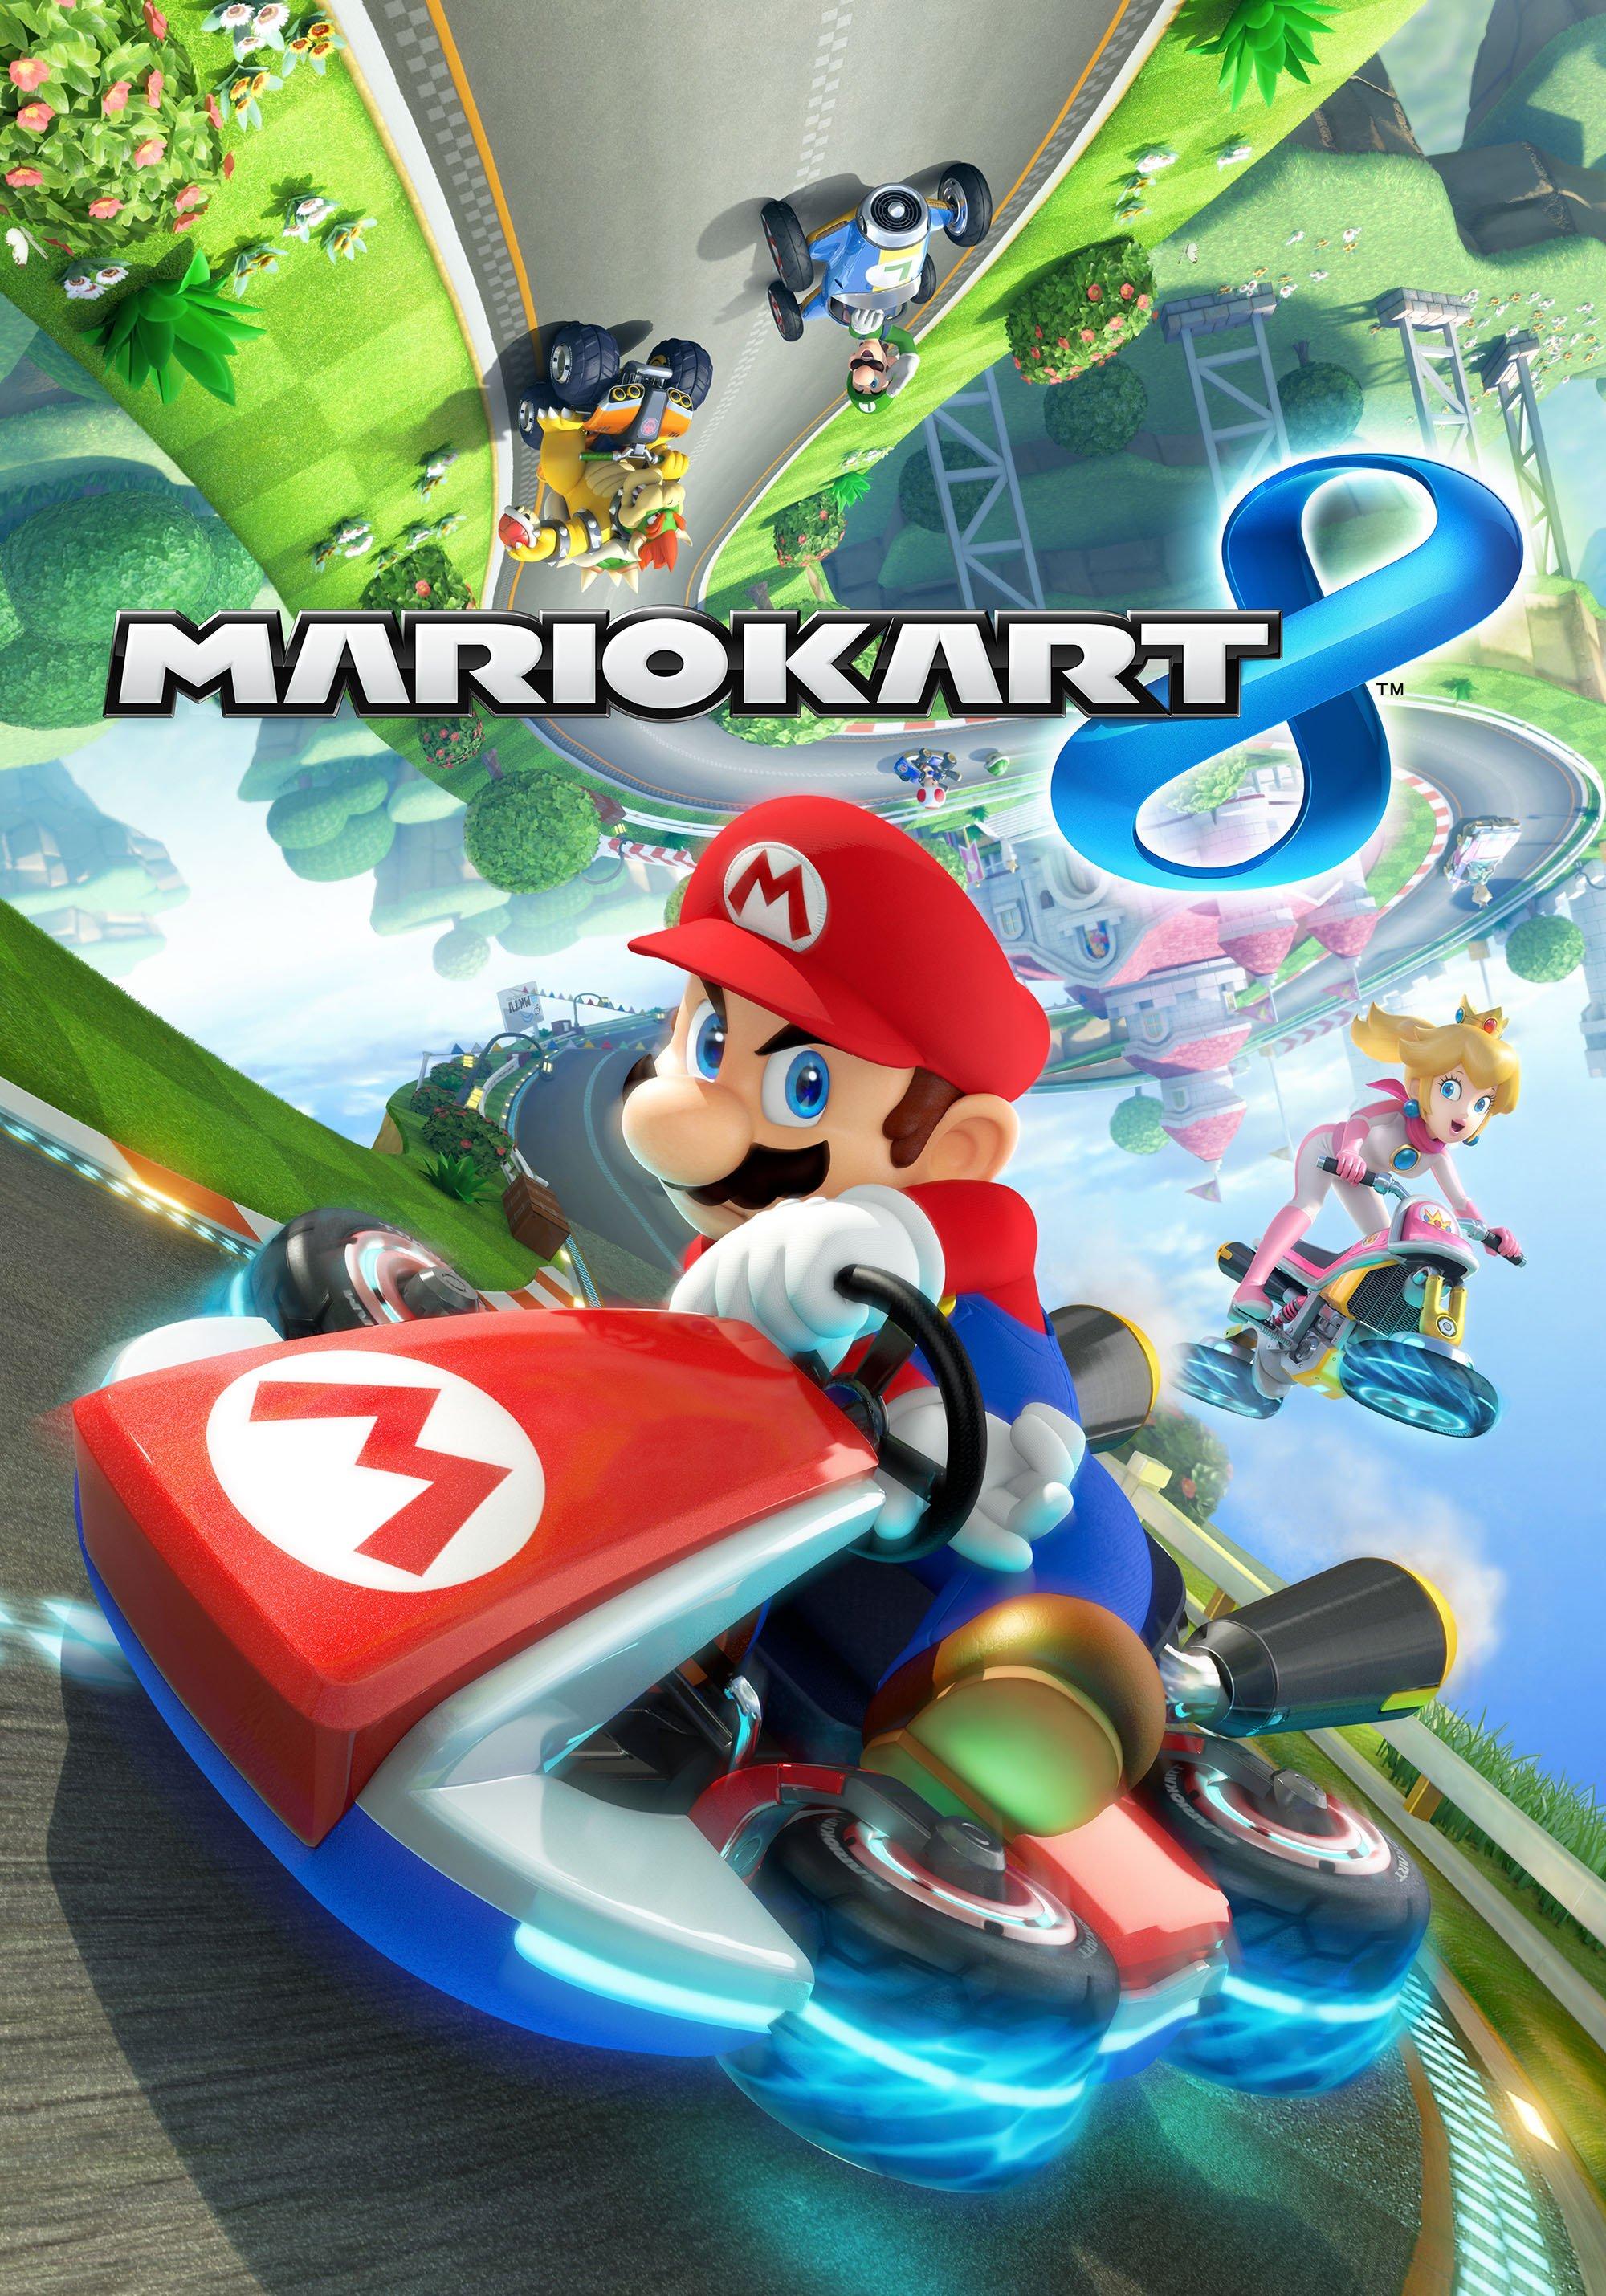 Am I Blind Or Does 'Mario Kart 8' Look Identical On The Nintendo Switch And  Wii U?